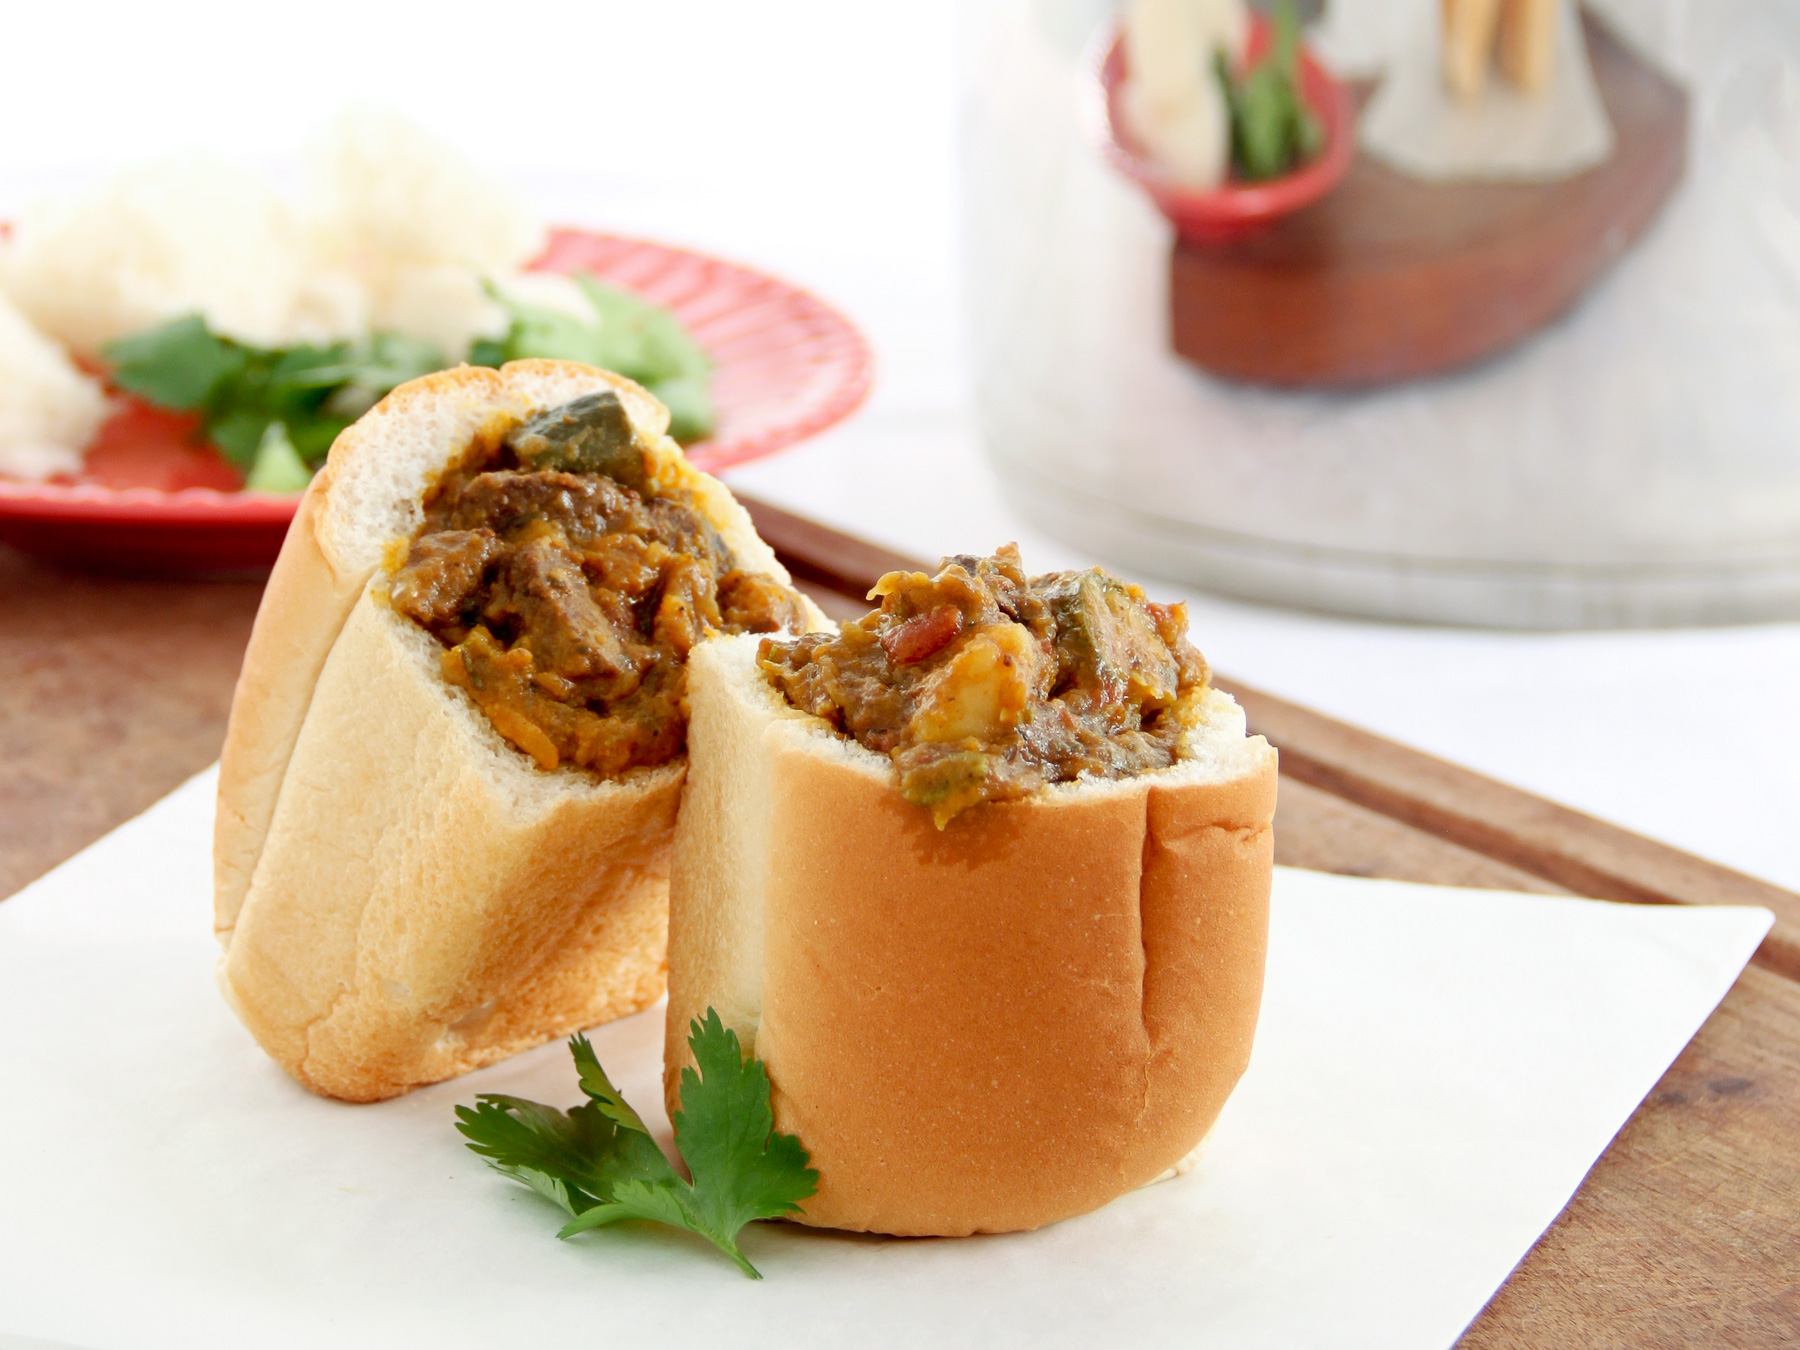 mutton curry bunny chow in a mini loaf using AMC Speedcooker